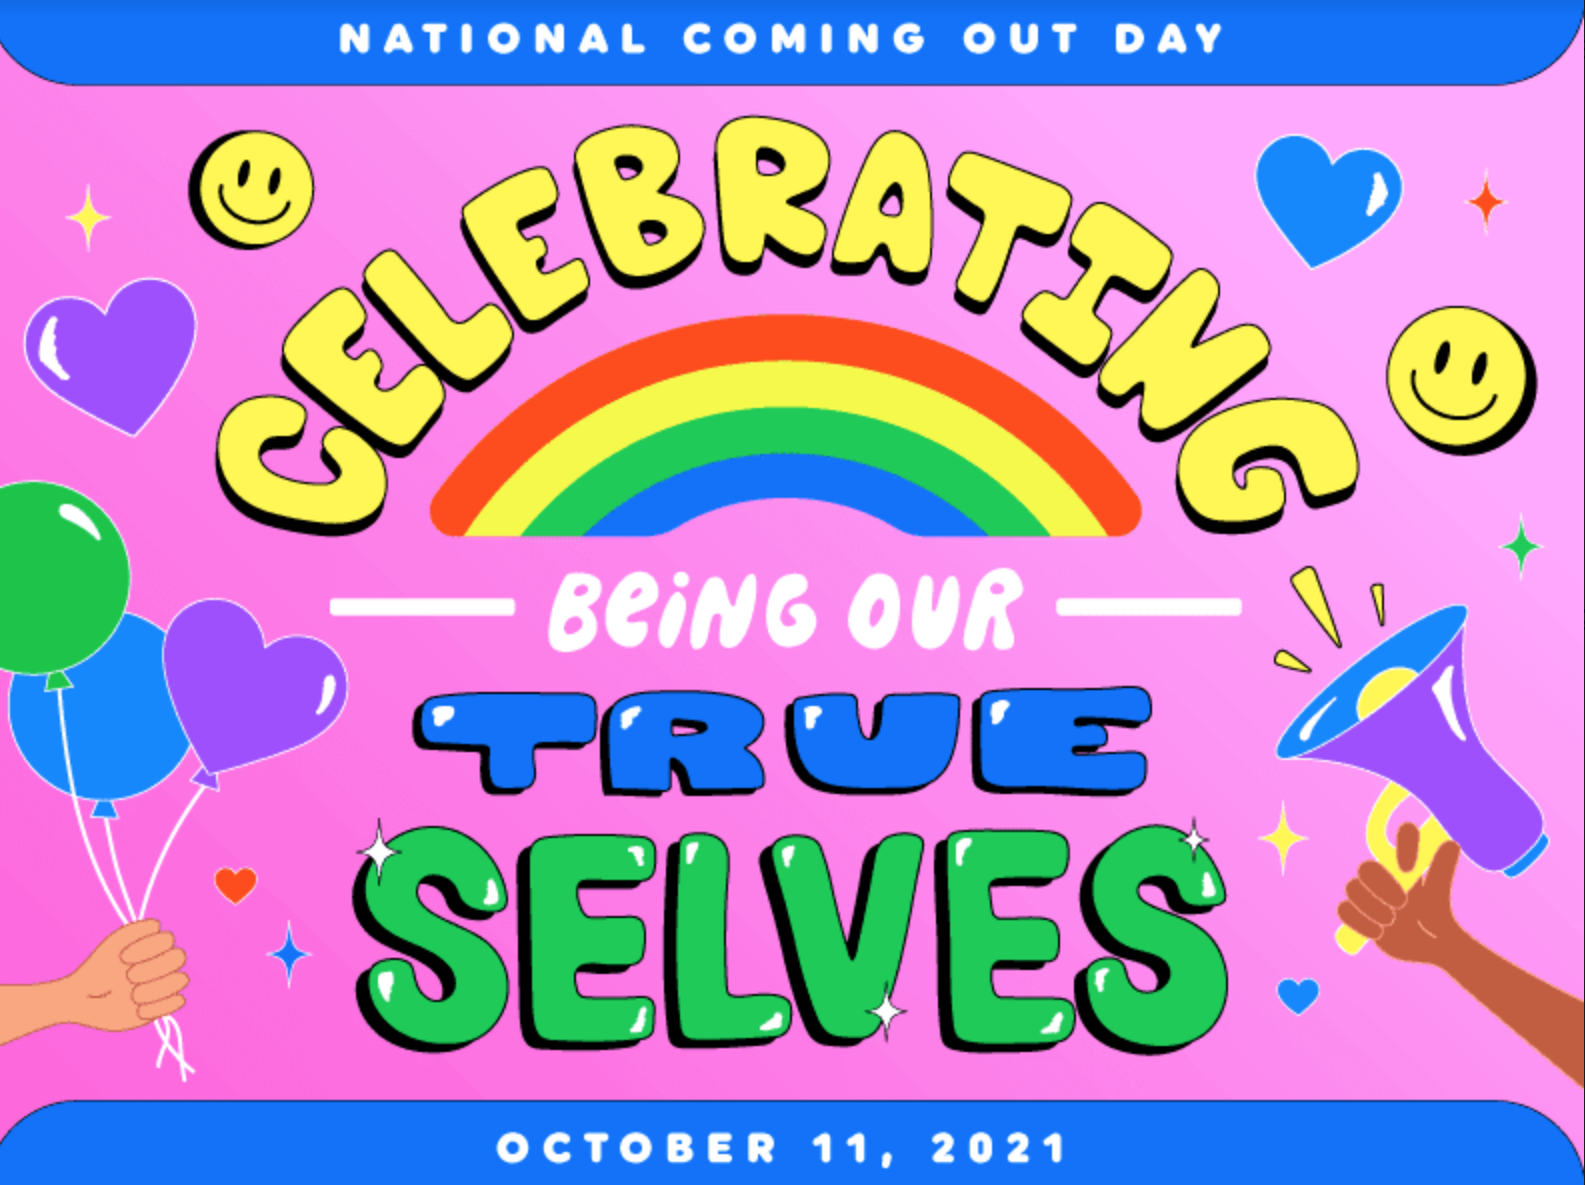 National Coming Out Day: Celebrating Being Our True Selves